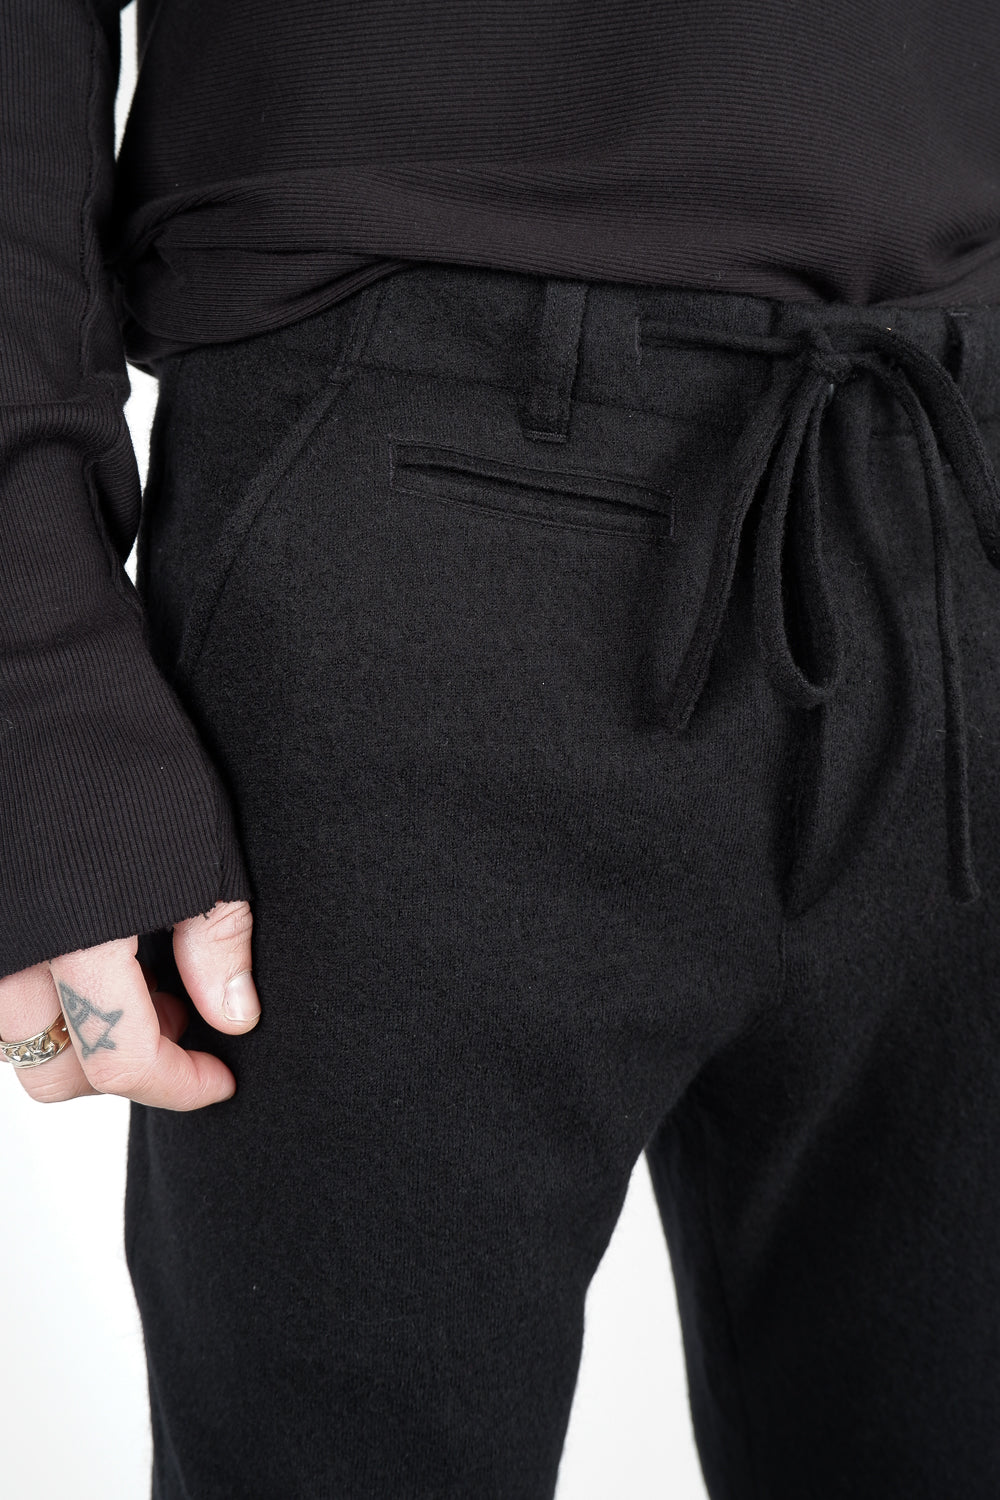 Buy the Hannes Roether Boiled Wool Trousers in Black at Intro. Spend £50 for free UK delivery. Official stockists. We ship worldwide.